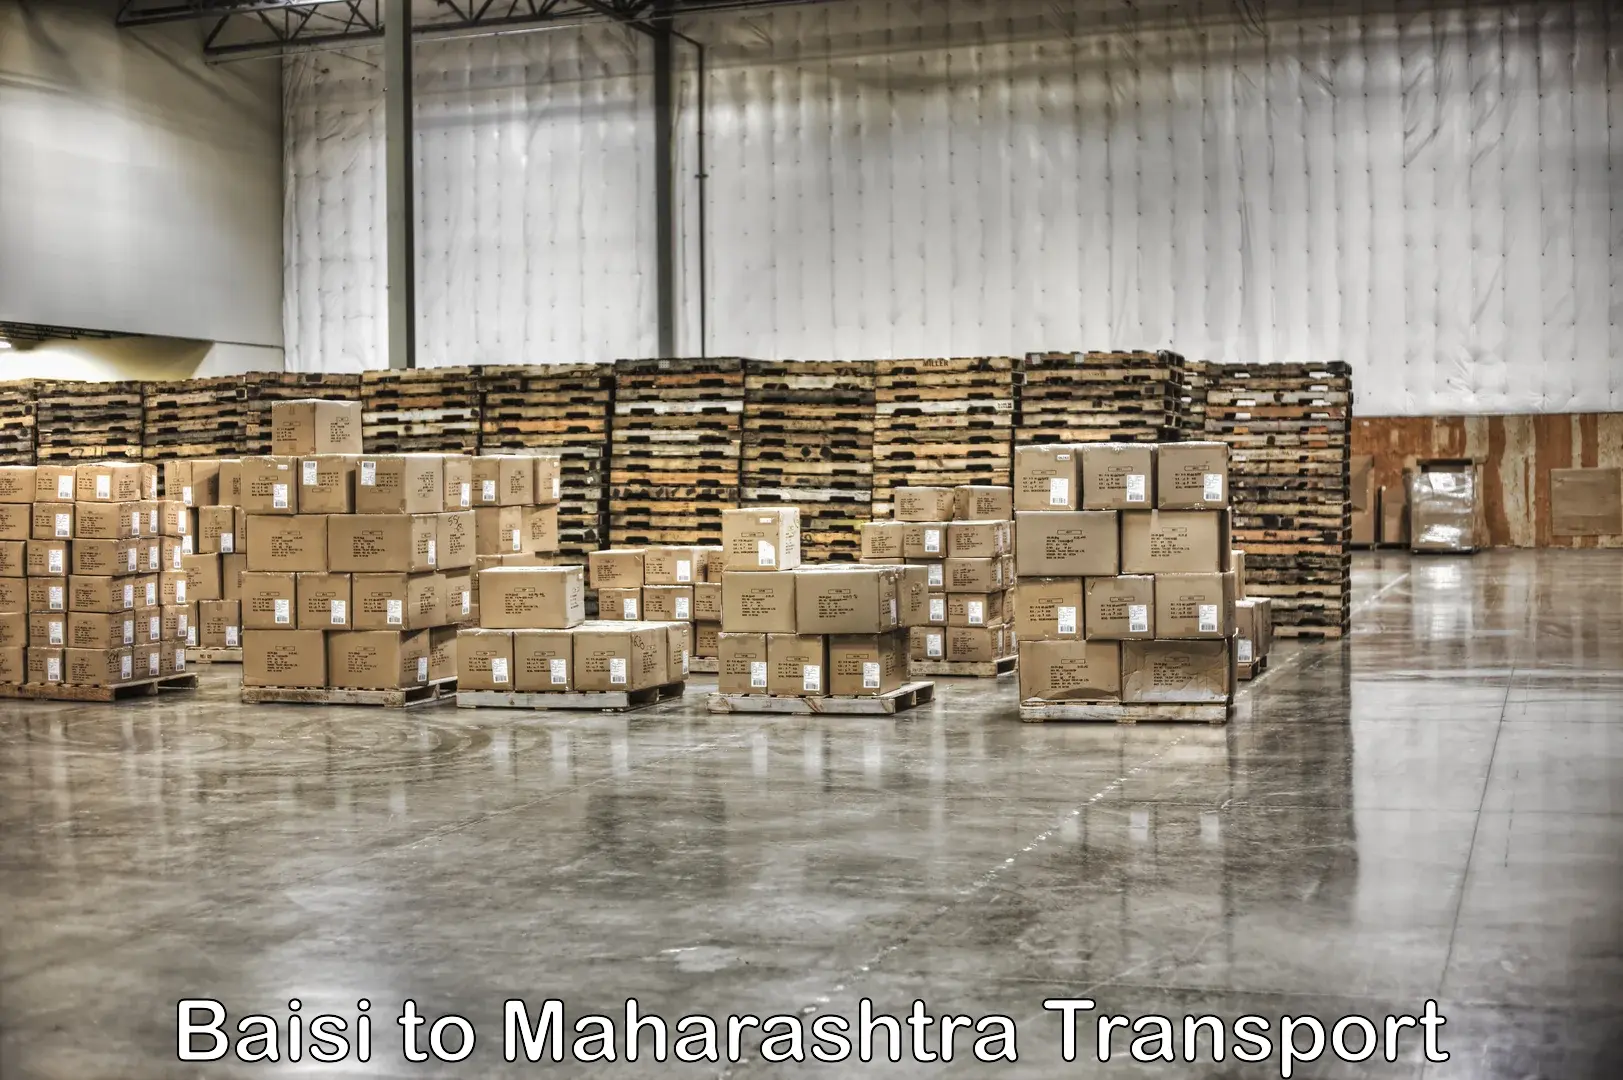 Truck transport companies in India Baisi to Institute of Chemical Technology Mumbai